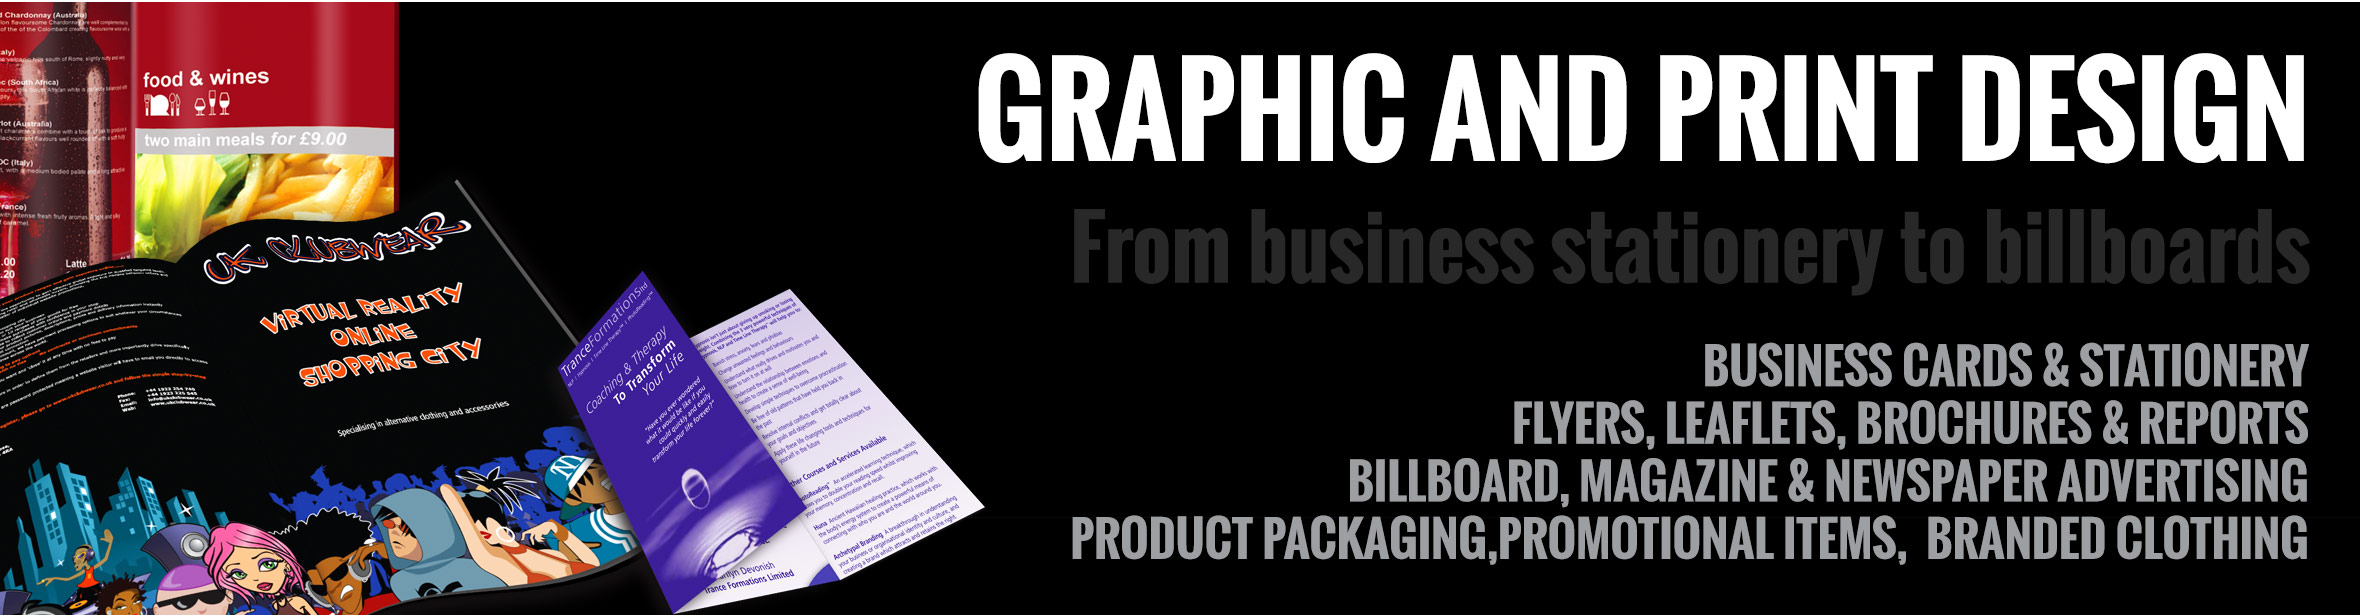 Graphic and Print Design